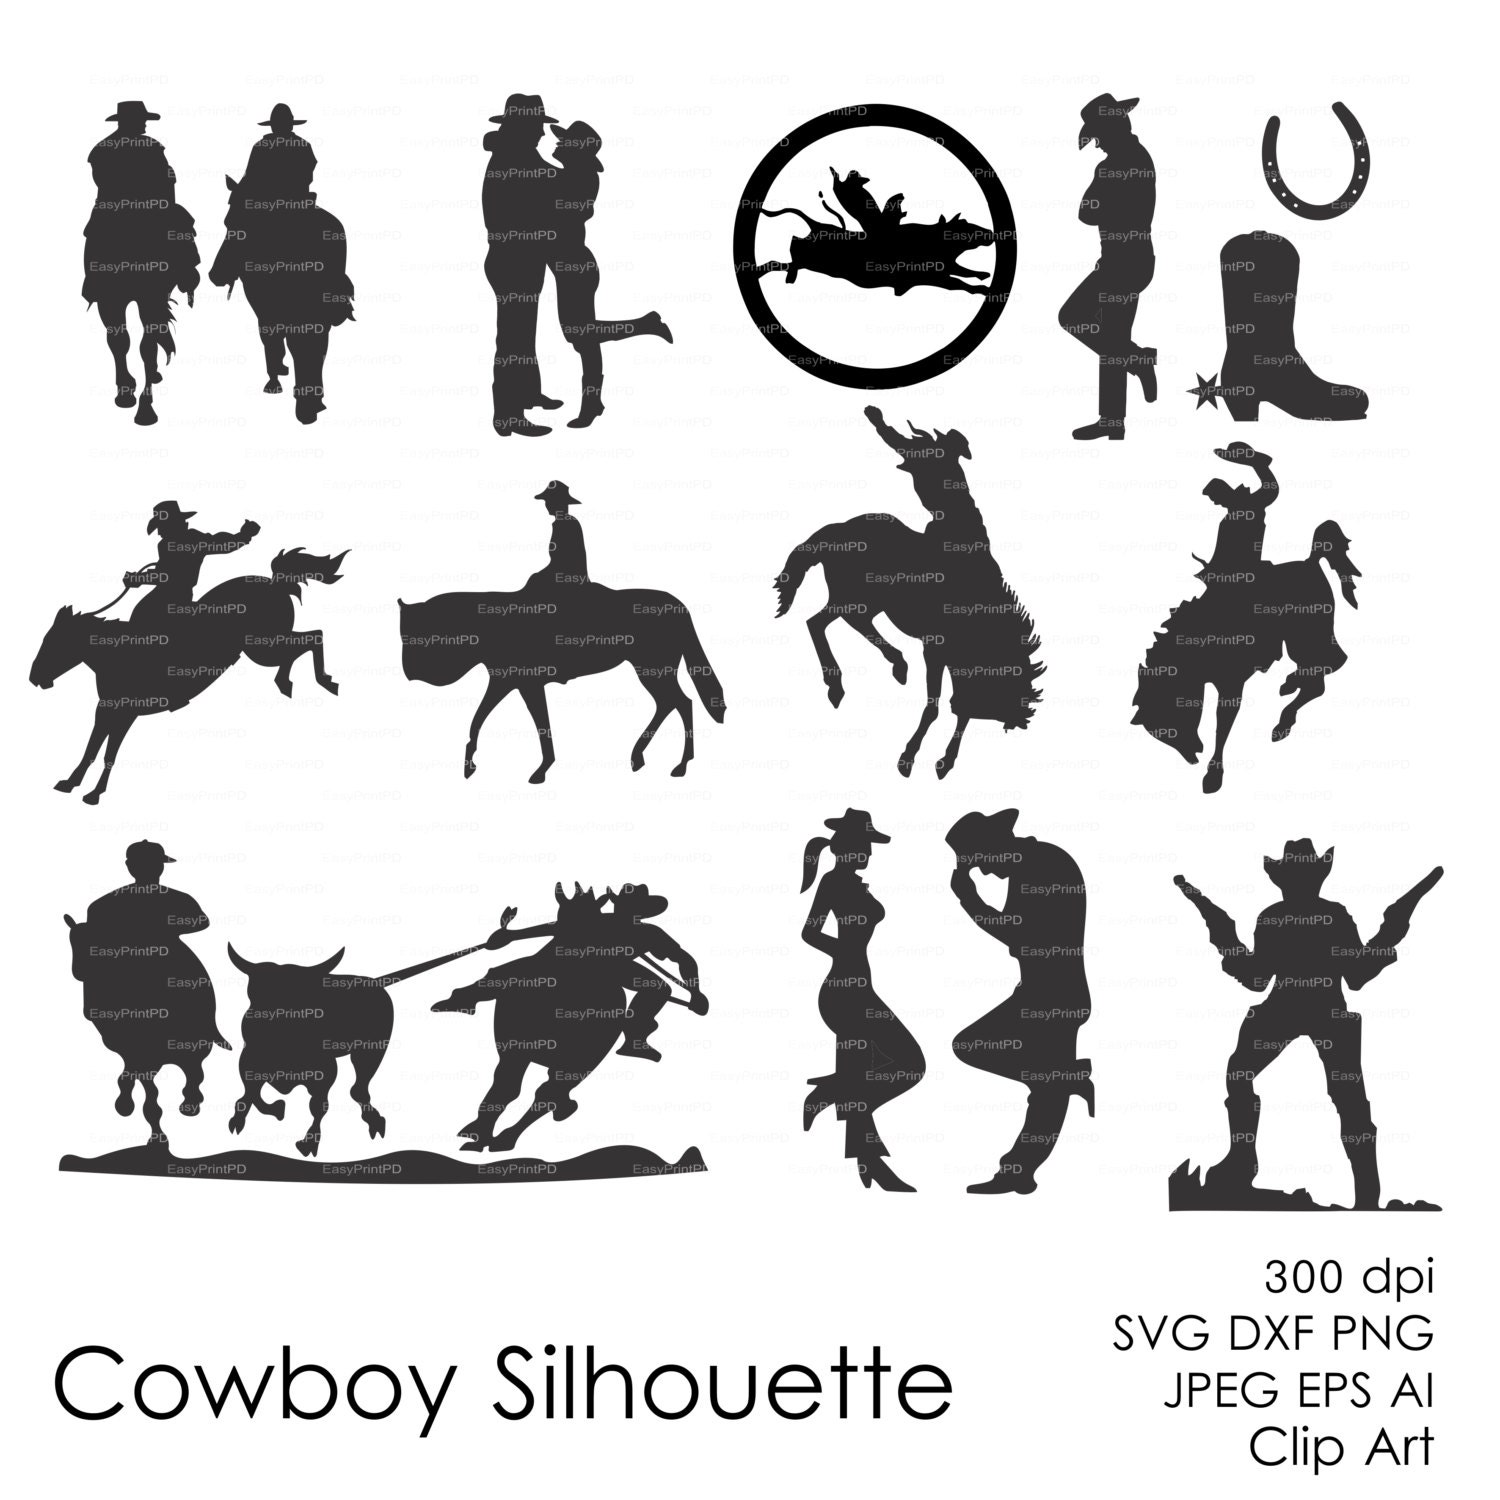 Download Cowboy Western Silhouettes Clipart eps svg dxf ai jpg | Etsy